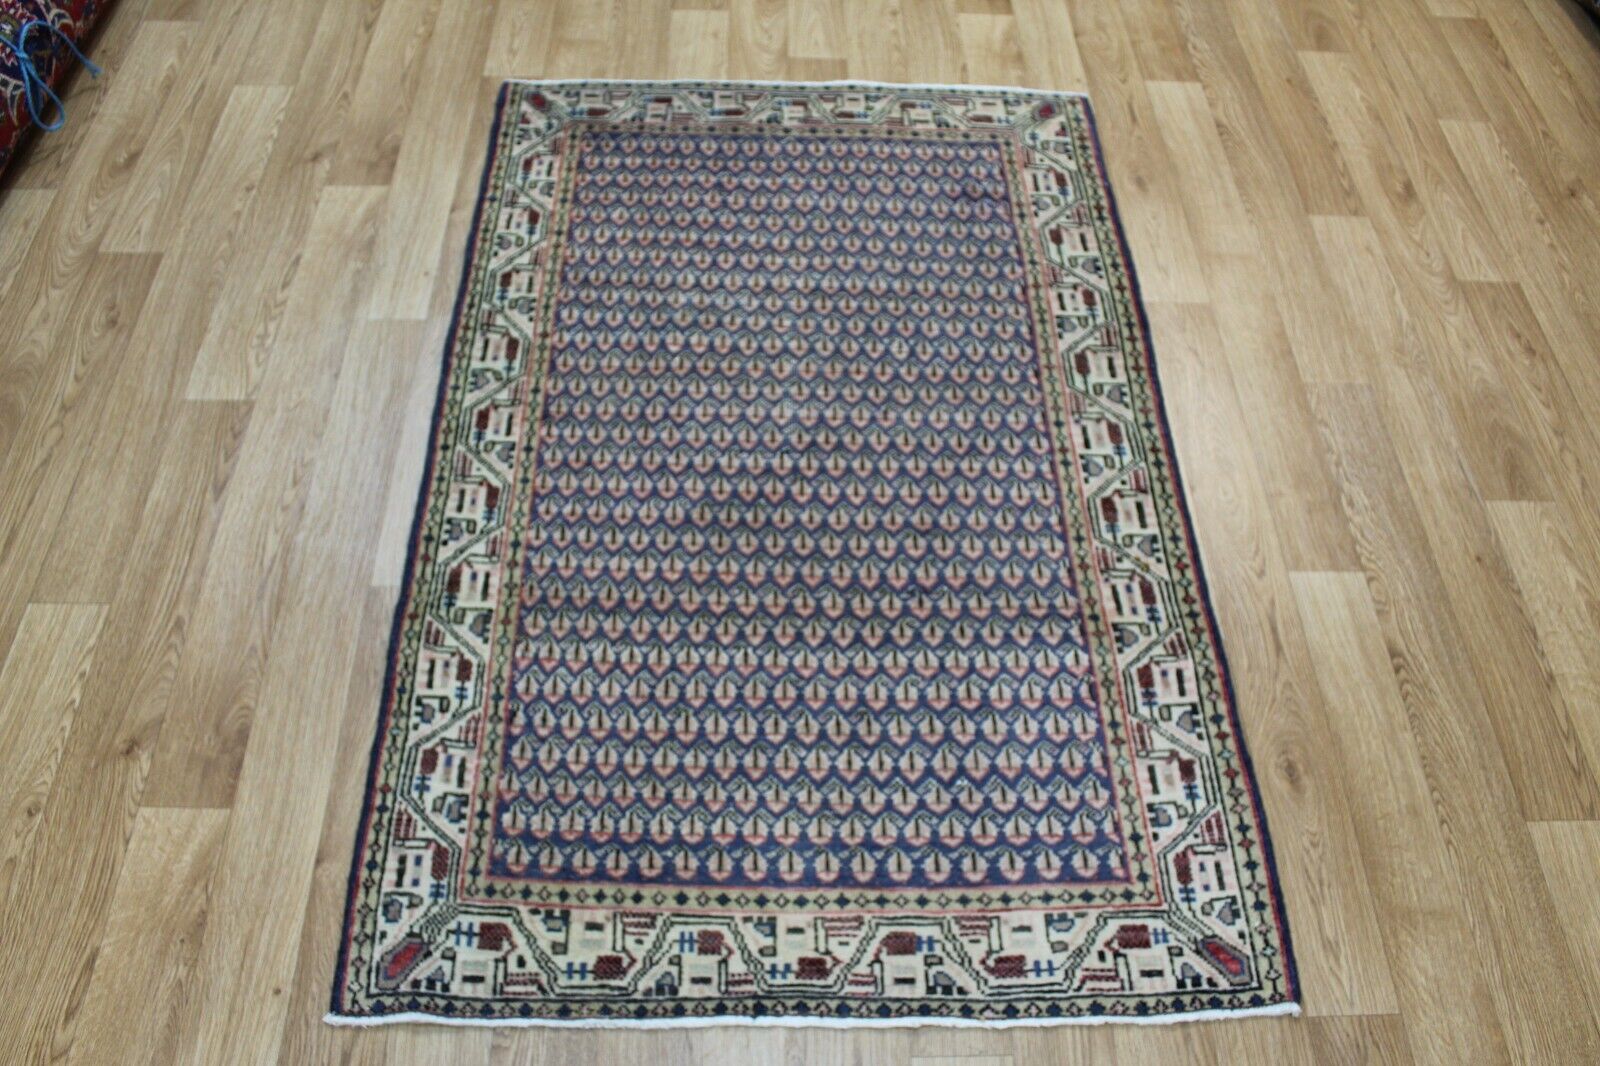 OLD HANDMADE PERSIAN RUG OF TRADITIONAL BOTEH DESIGN 150 X 95 CM - 5 X 3'2 FT 